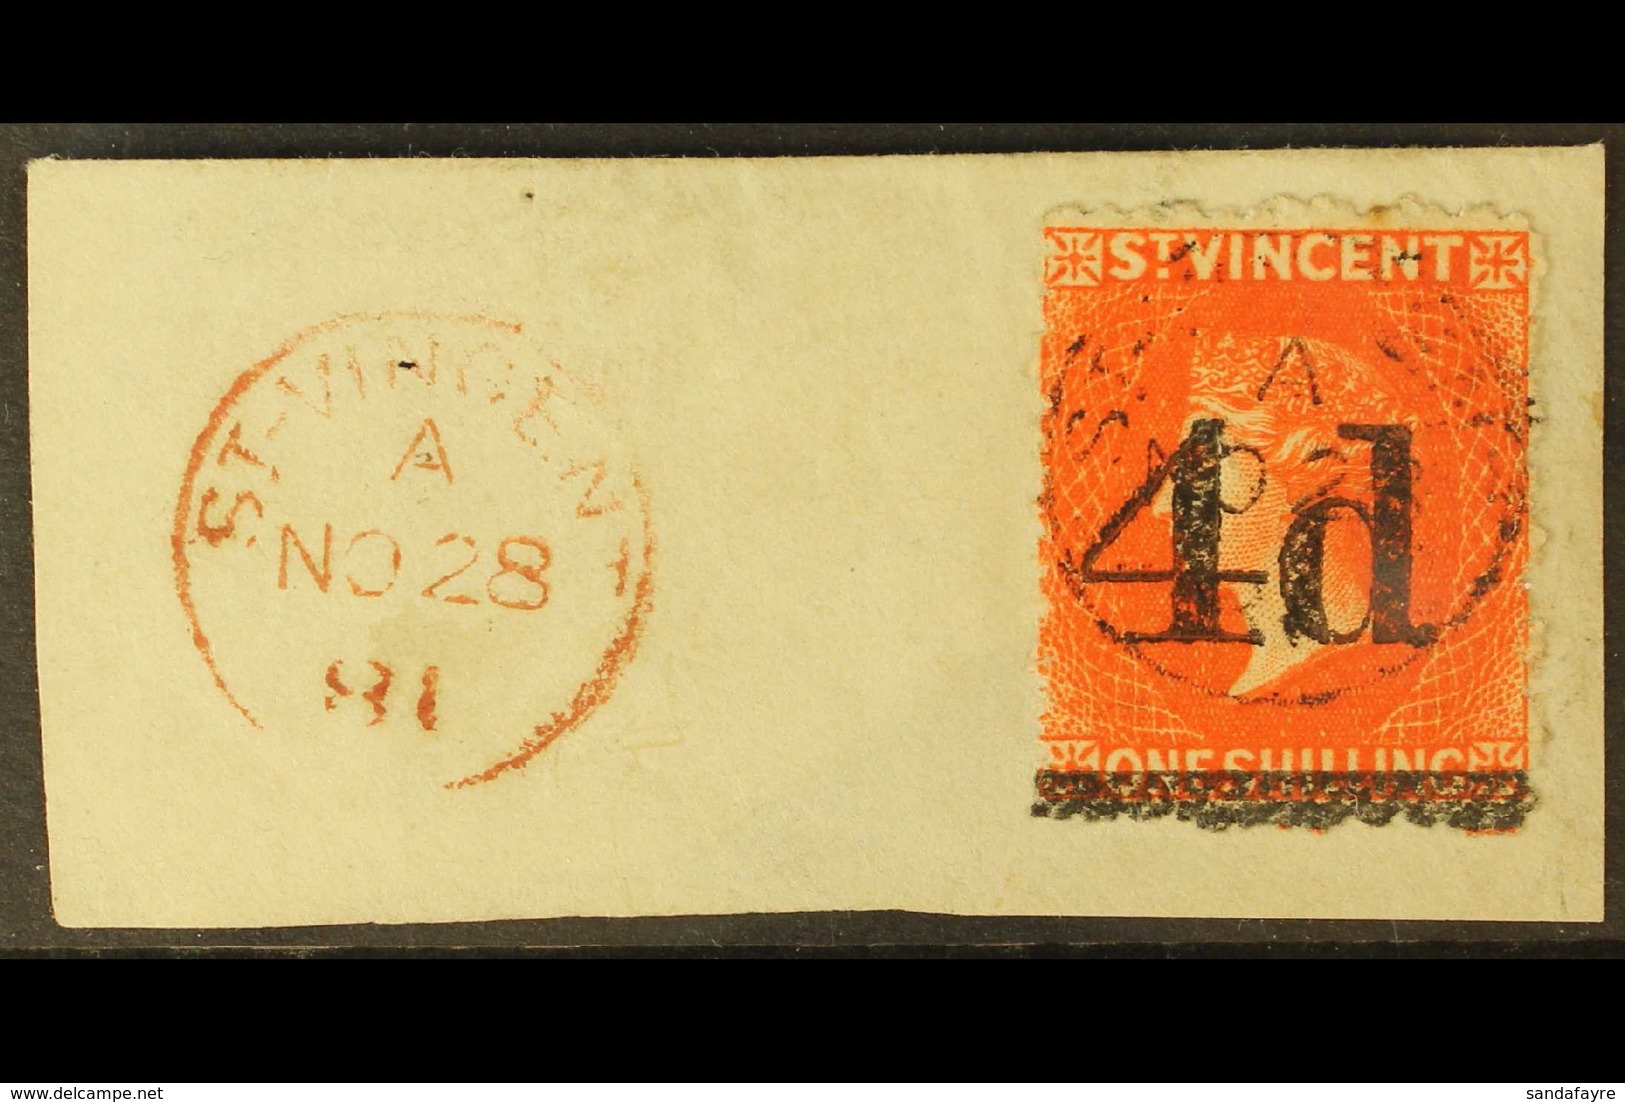 1881 4d On 1s Bright Vermilion, SG 35, Very Fine Used On Piece Cancelled By Superb DATE OF ISSUE 28 Nov 1881 Cds With An - St.Vincent (...-1979)